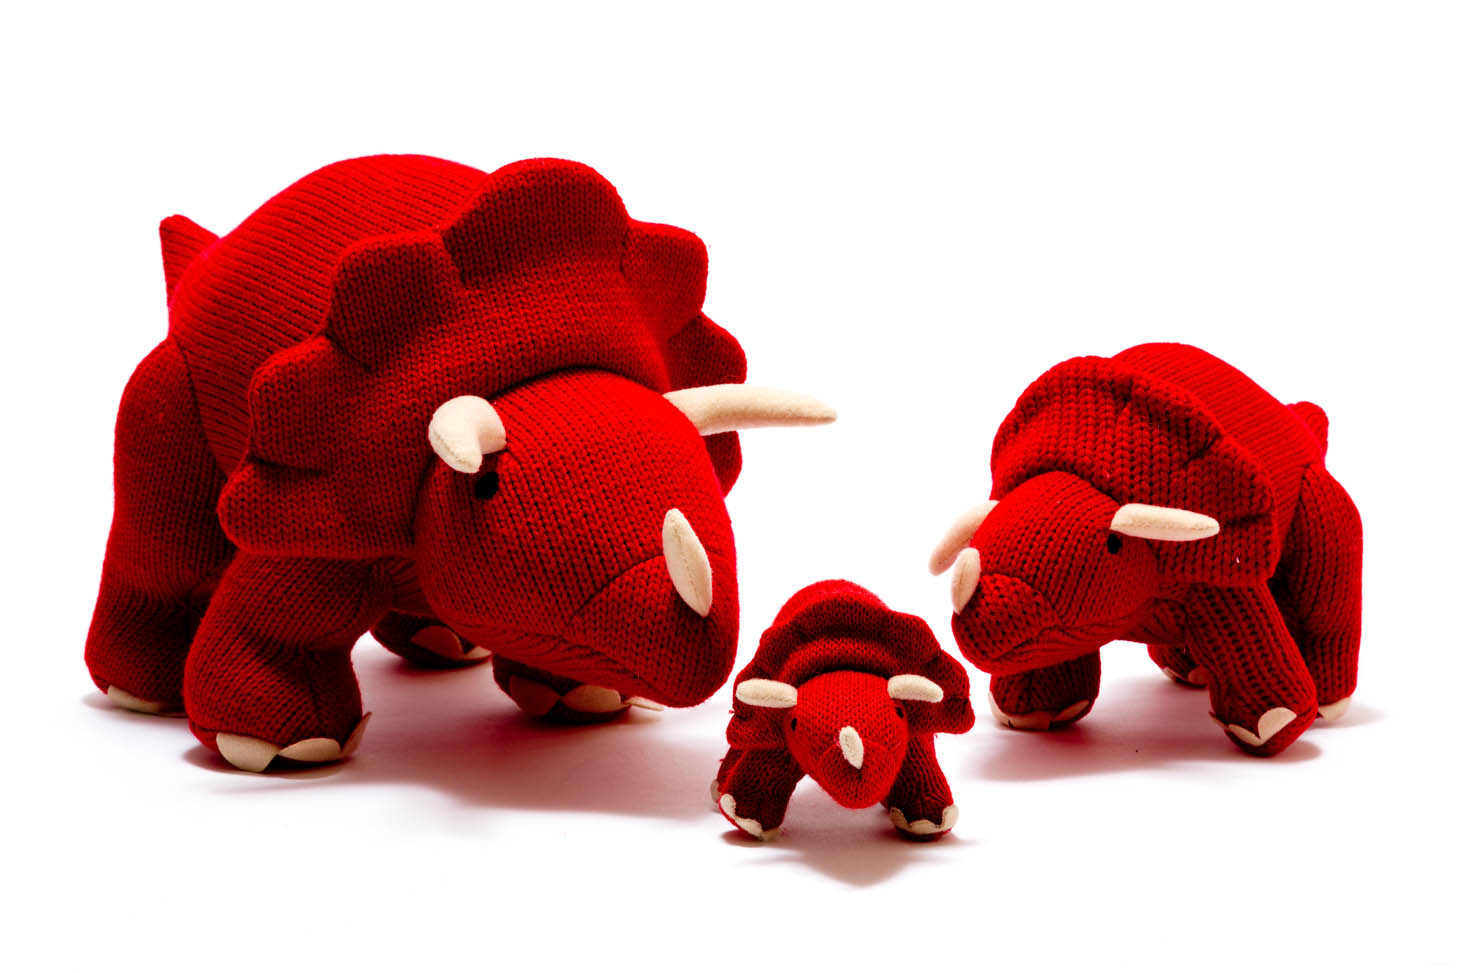 Knitted Small Red Triceratops Rattle